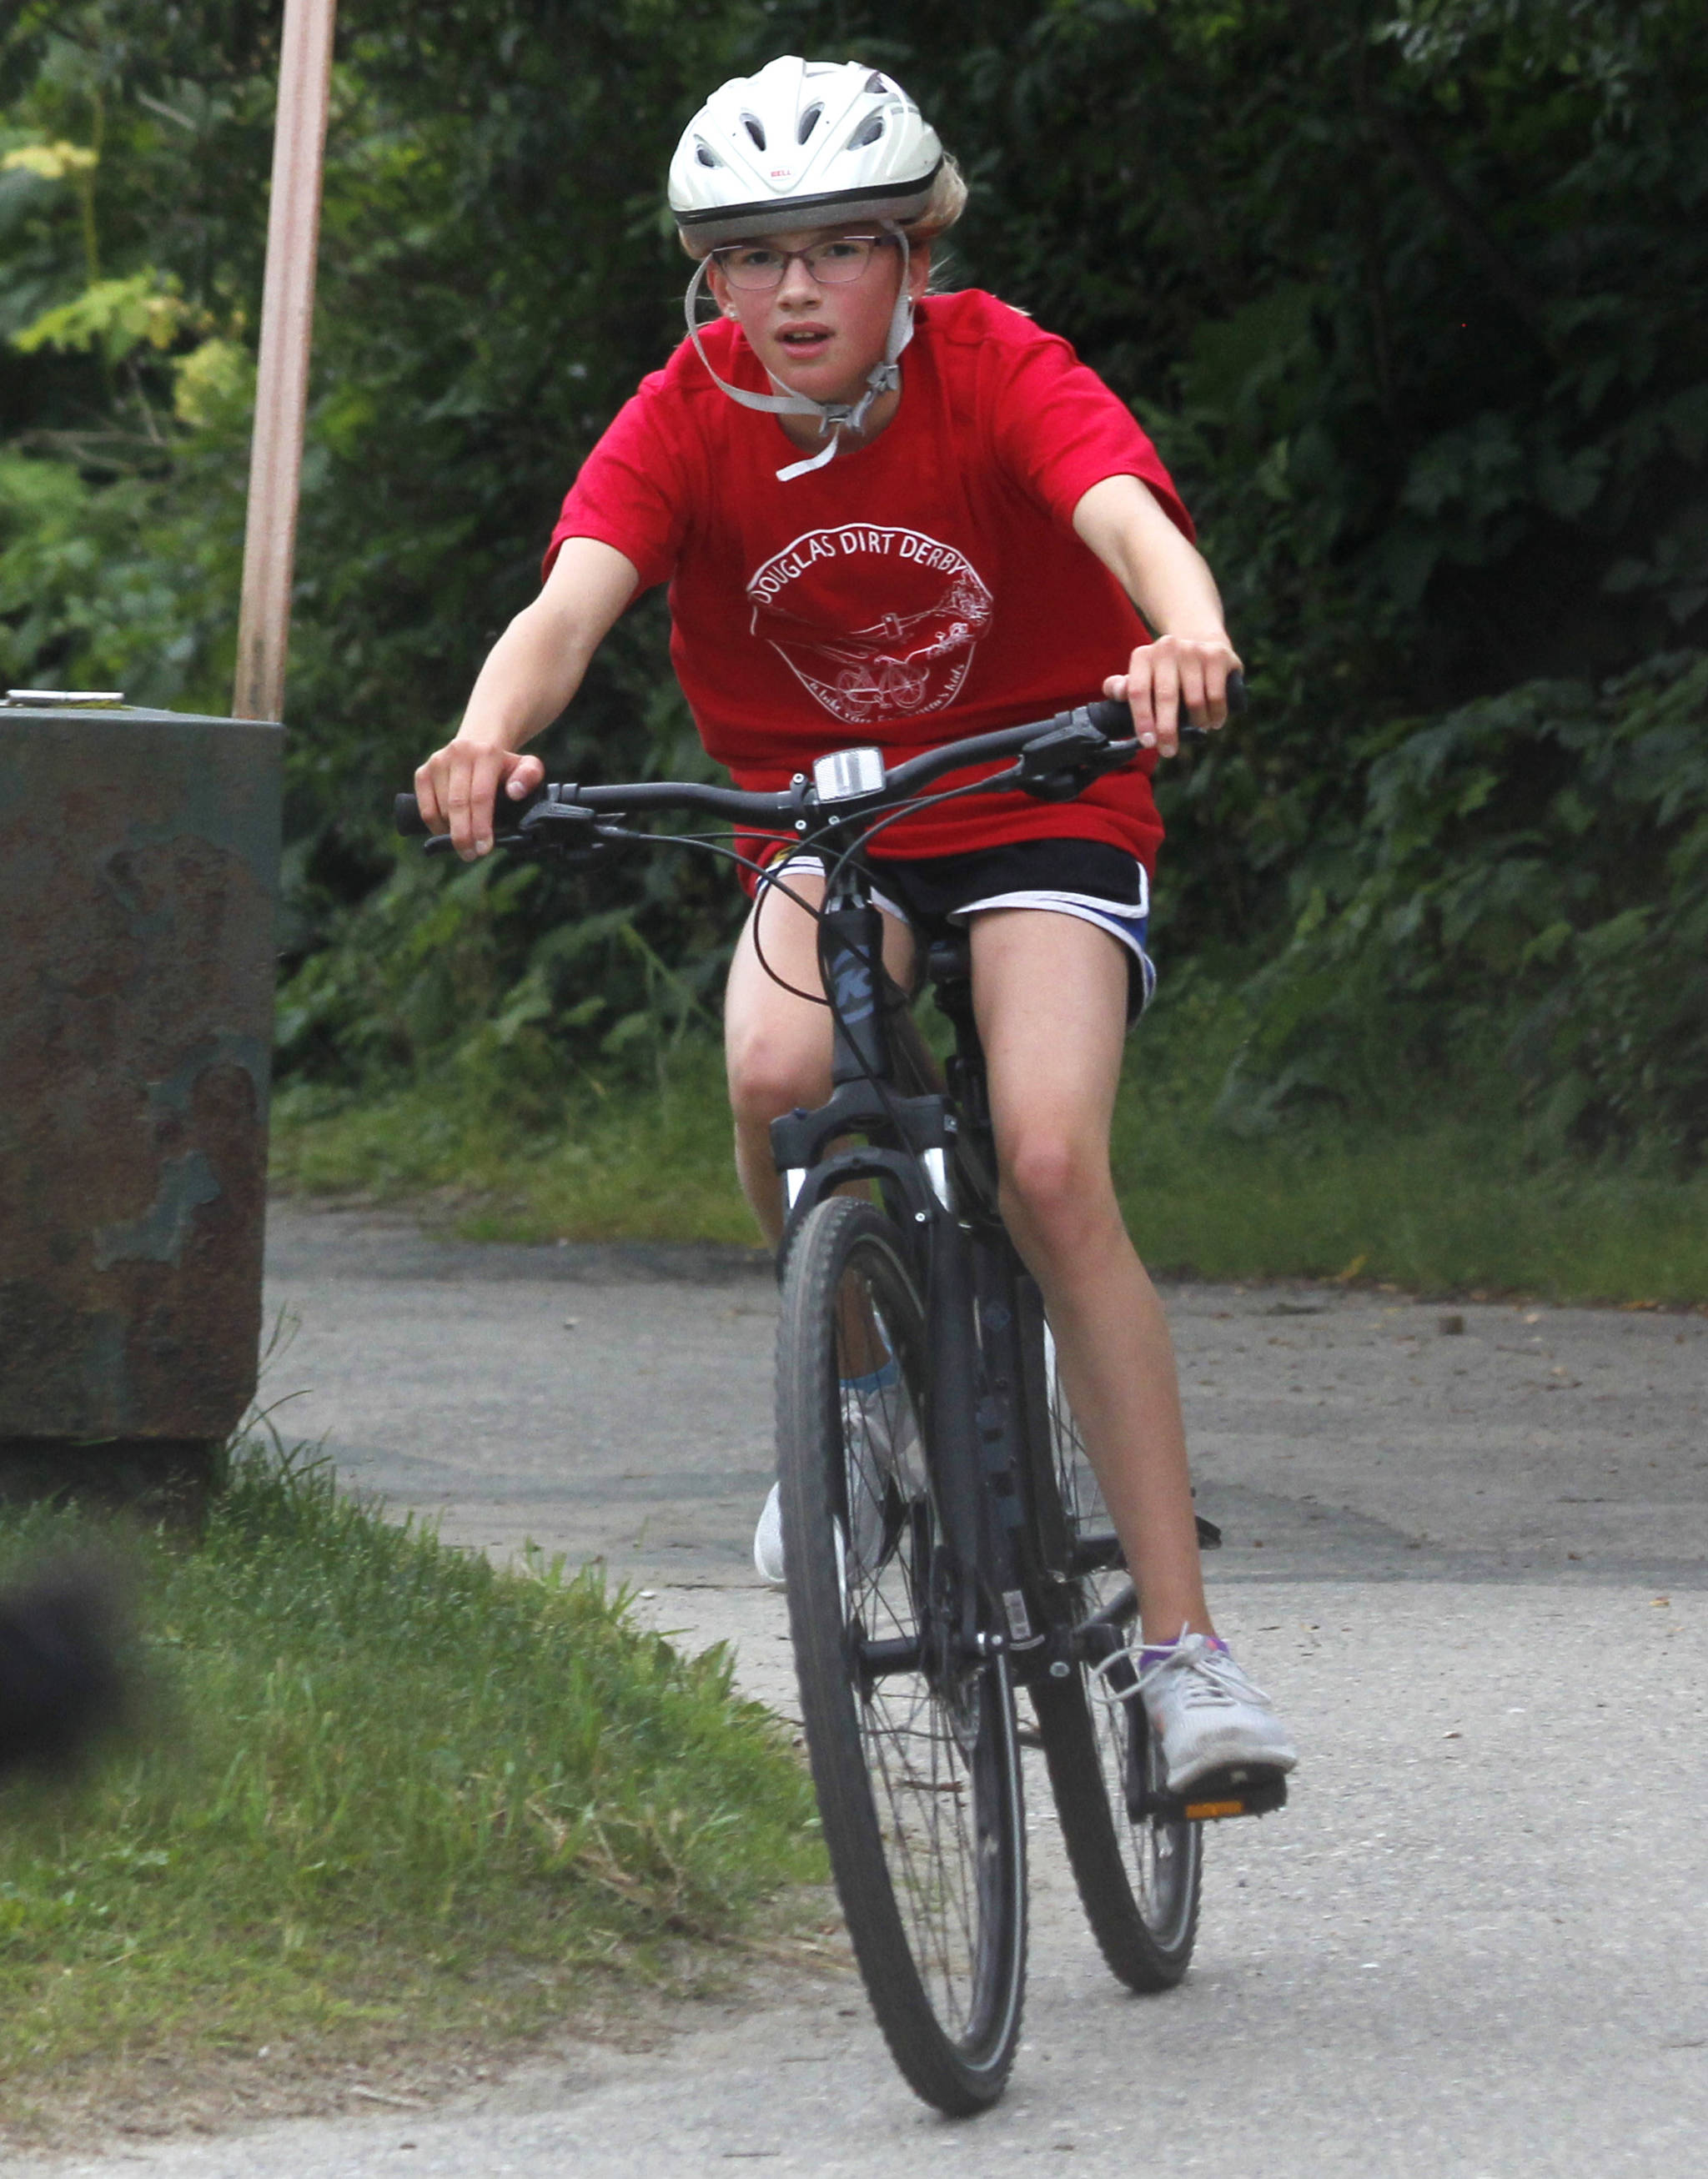 Emma Fellman, 11, rides in the Douglas Dirt Derby on Saturday, Aug. 4, 2018 at Savikko Park in Douglas. Fellman finished second in her age group, and the event raised about $6,000 for the American Diabetes Association. (Alex McCarthy | Juneau Empire)